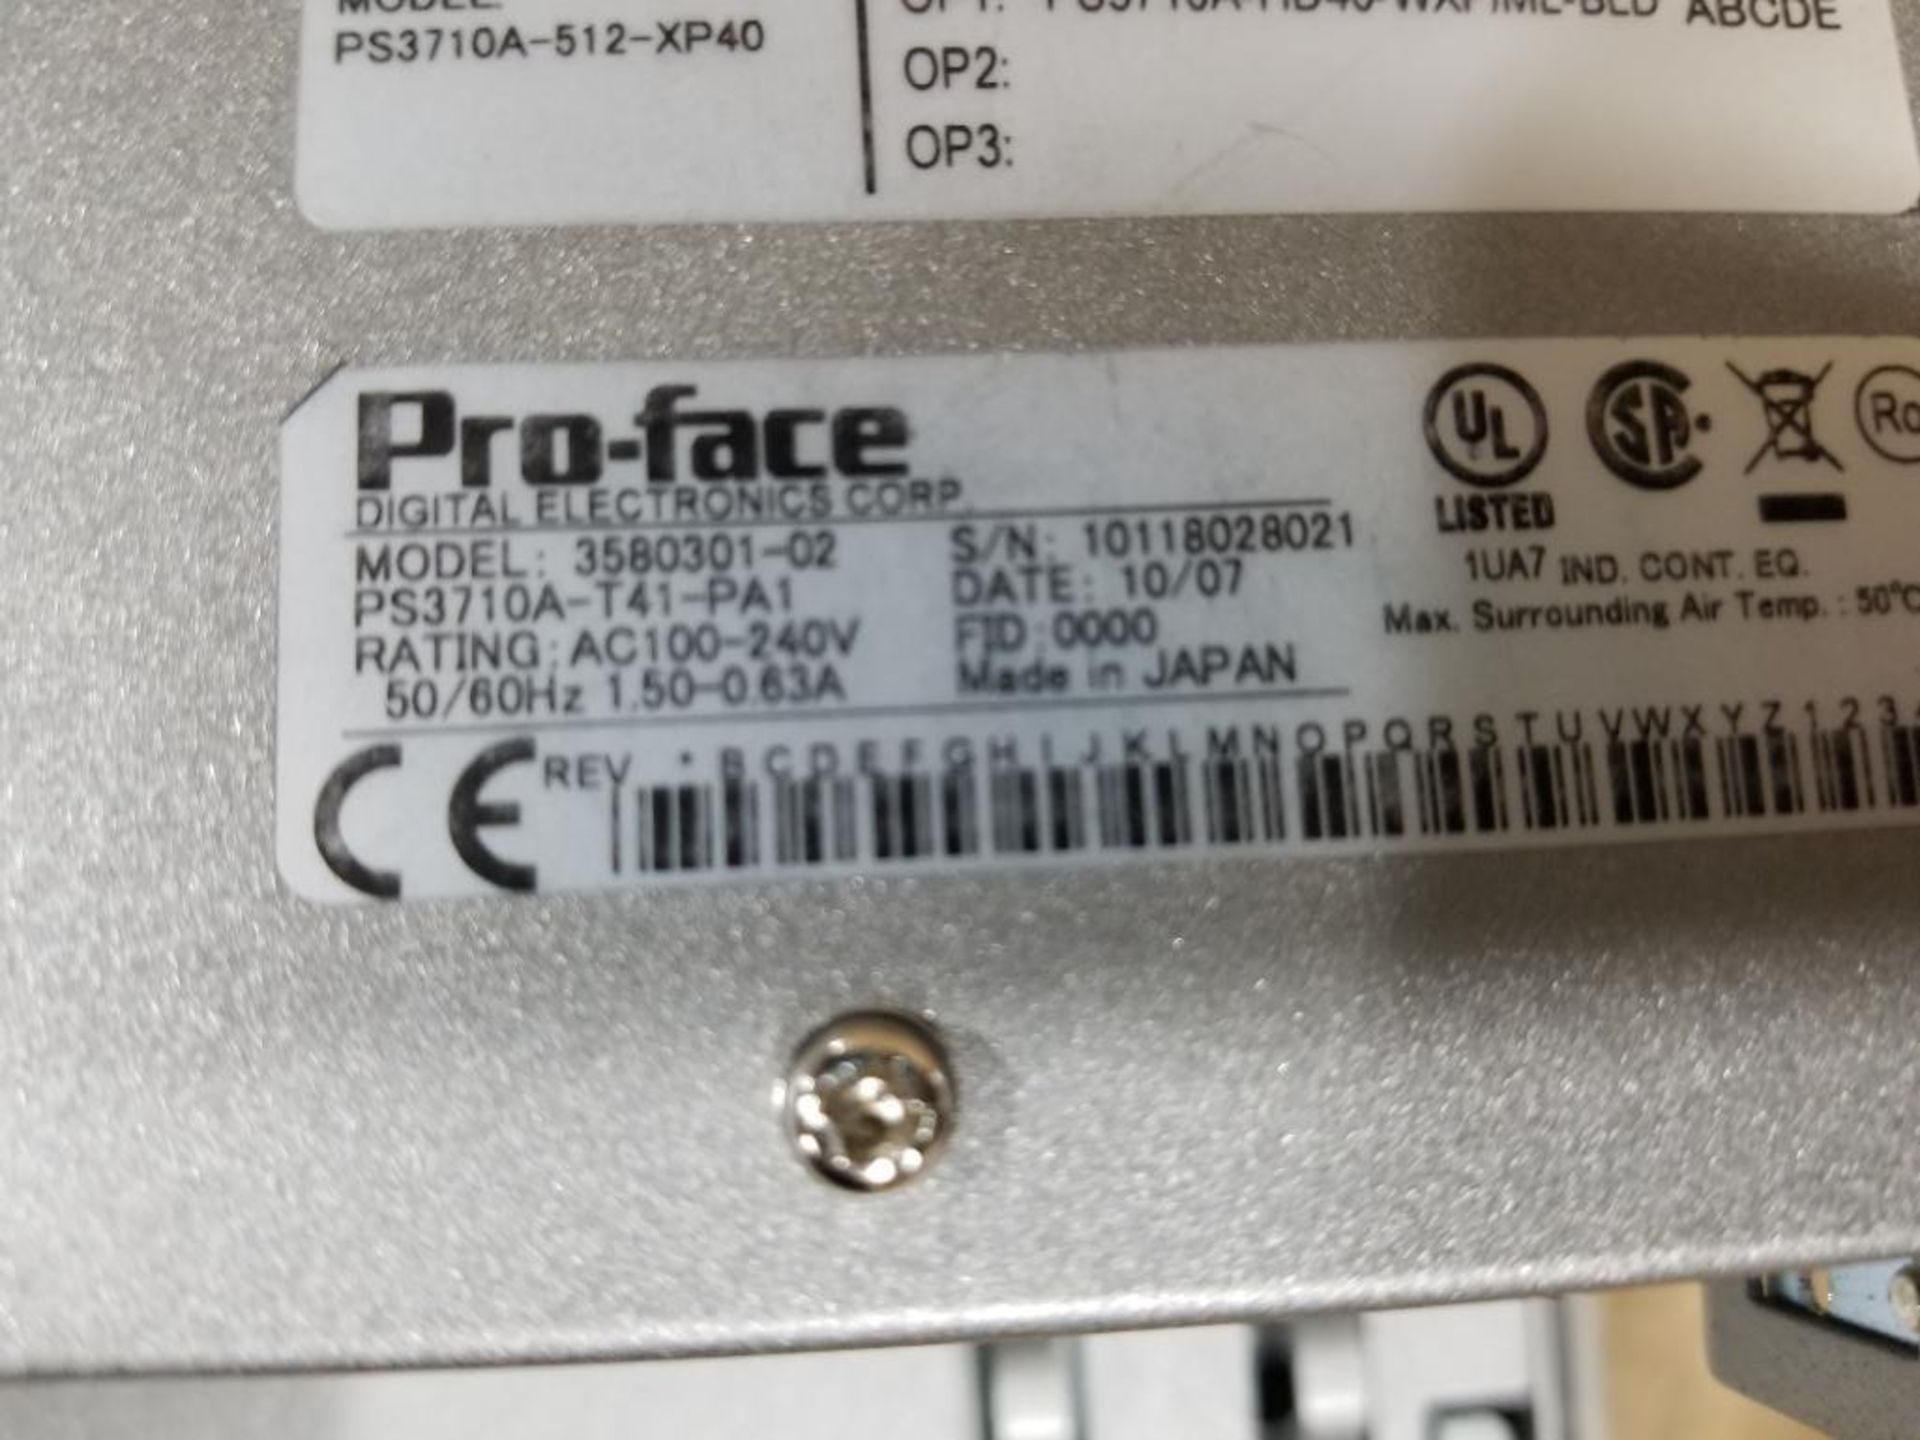 ProFace human machine interface. Model number 3580301-02. Part number PS3710A-T41-PA1. - Image 10 of 11